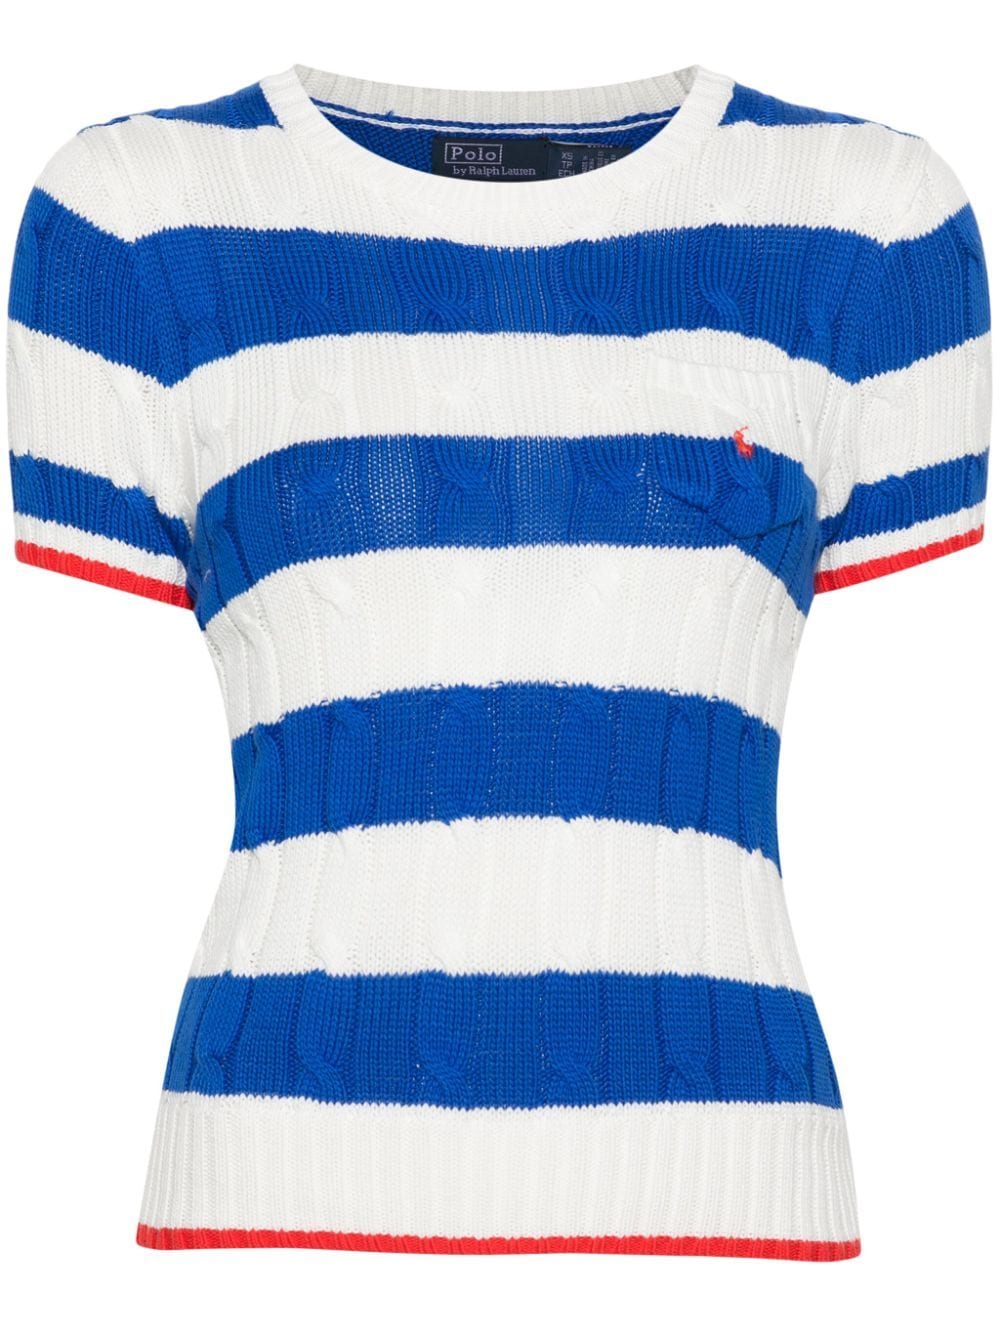 POLO RALPH LAUREN STRIPED CABLE-KNIT TOP